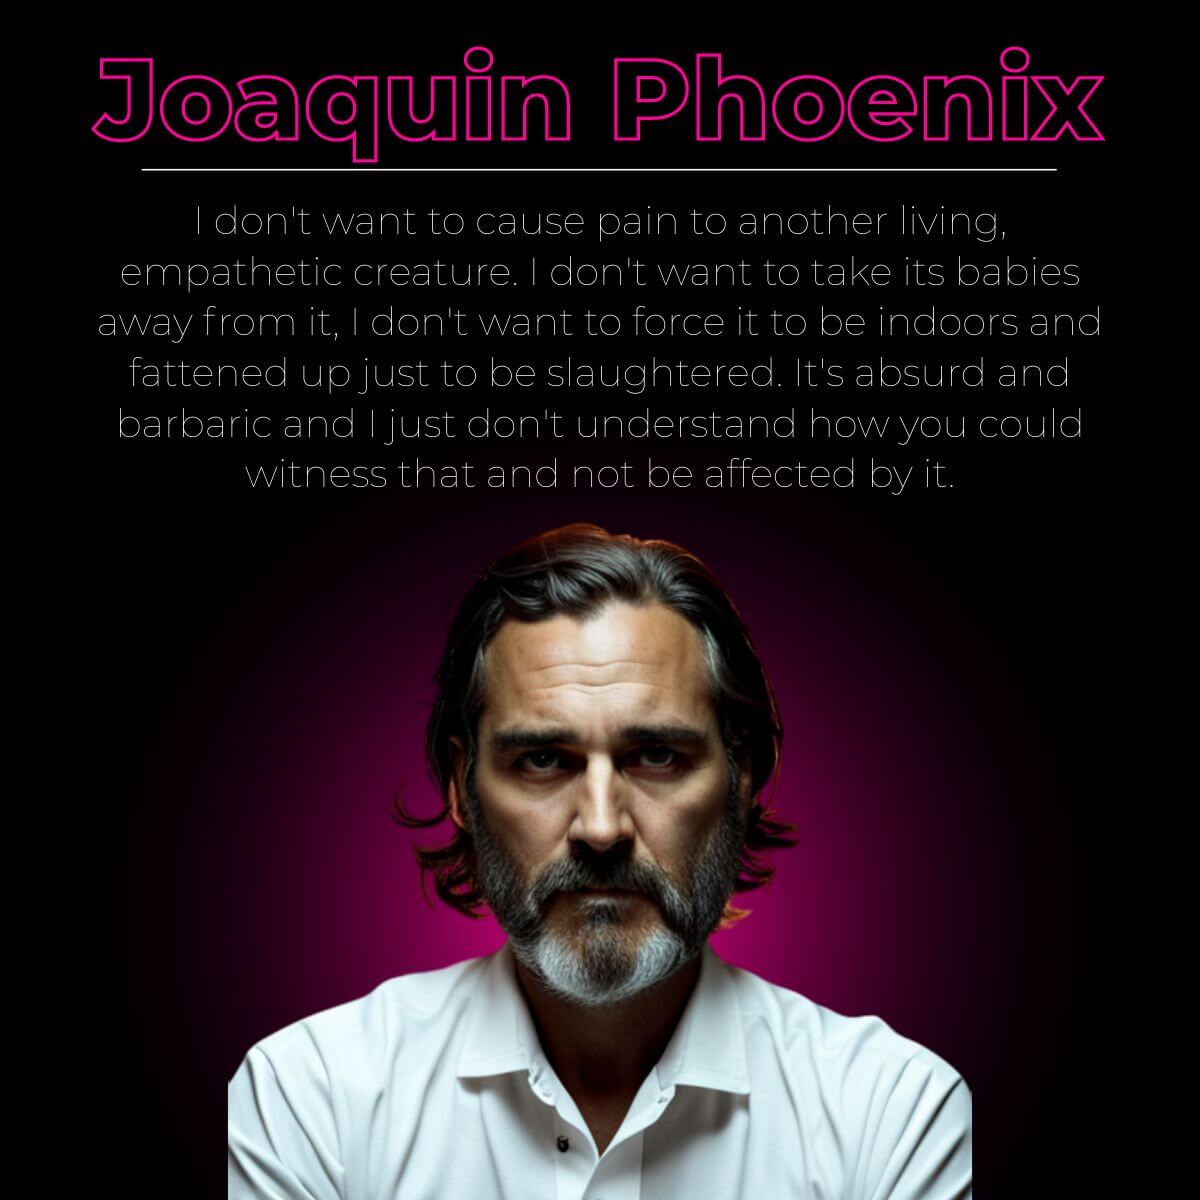 Joaquin Phoenix: A passionate advocate for veganism, using his platform to make a positive impact in the world.